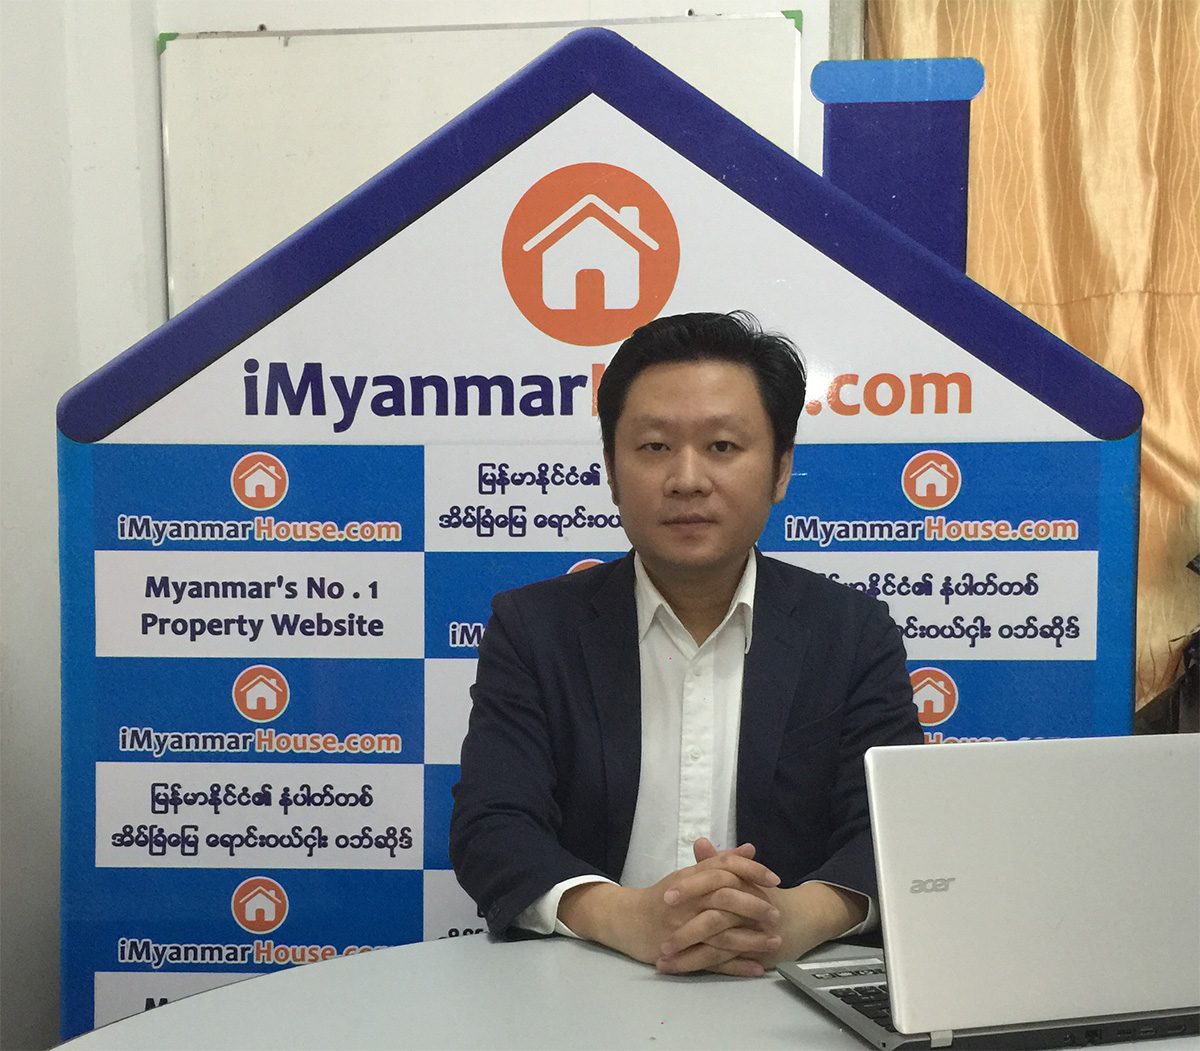 iMyanmarHouse founder secures 50% soft commitment for $5m local VC fund